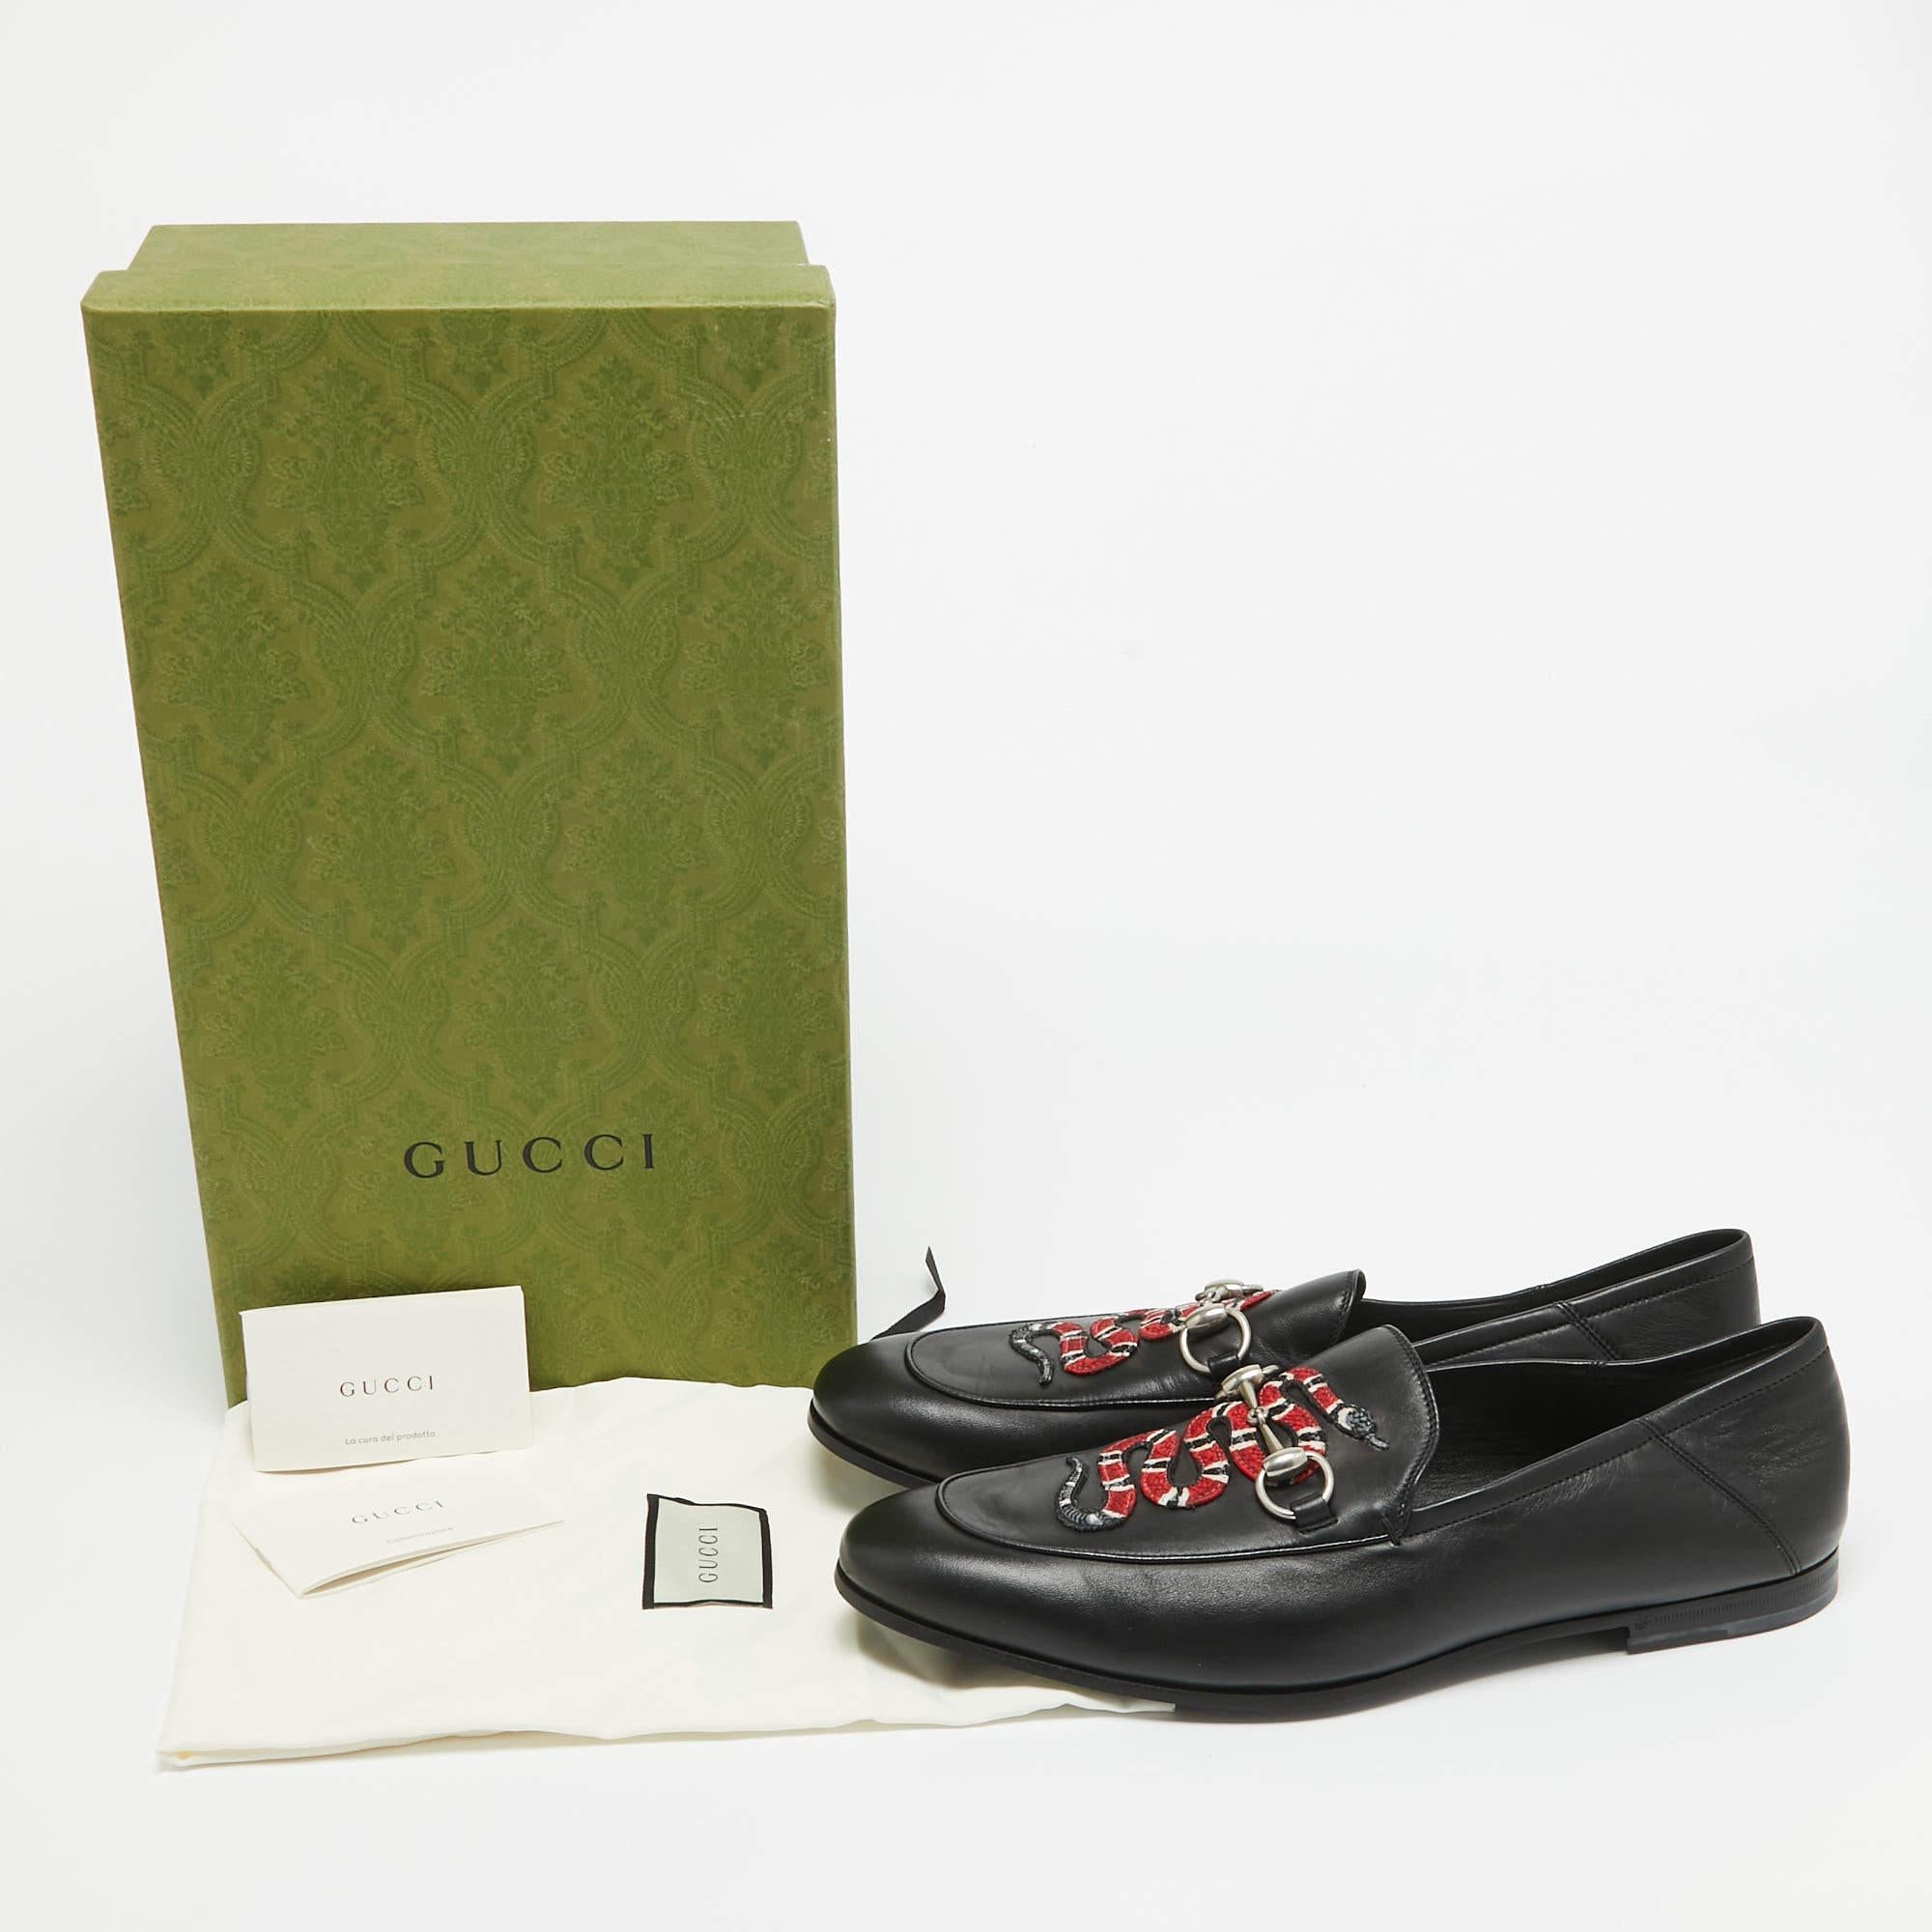 Gucci Black Leather Embroidered Kingsnake Brixton Horsebit Loafers Size 44.5 5